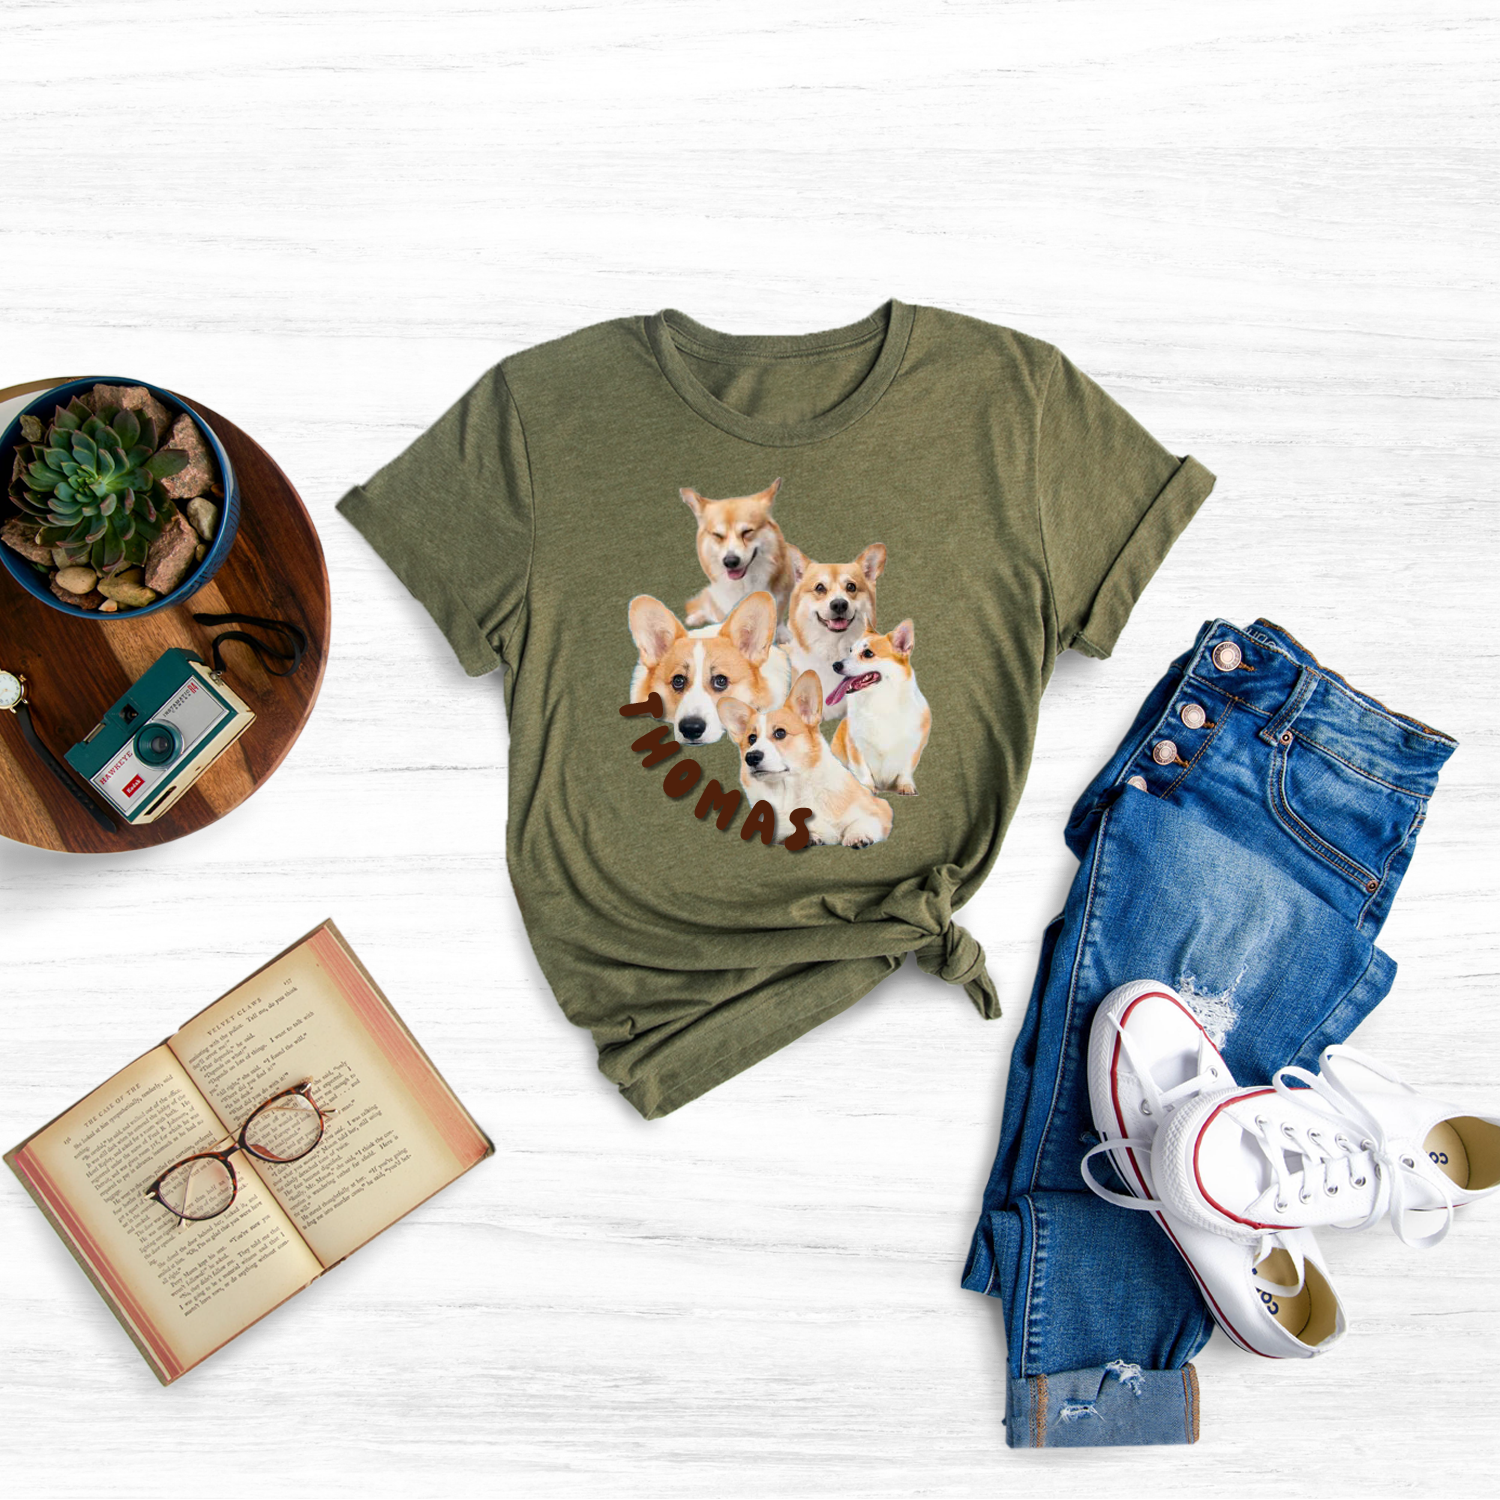 Show off your furry friend's unique personality with a personalized pet shirt.